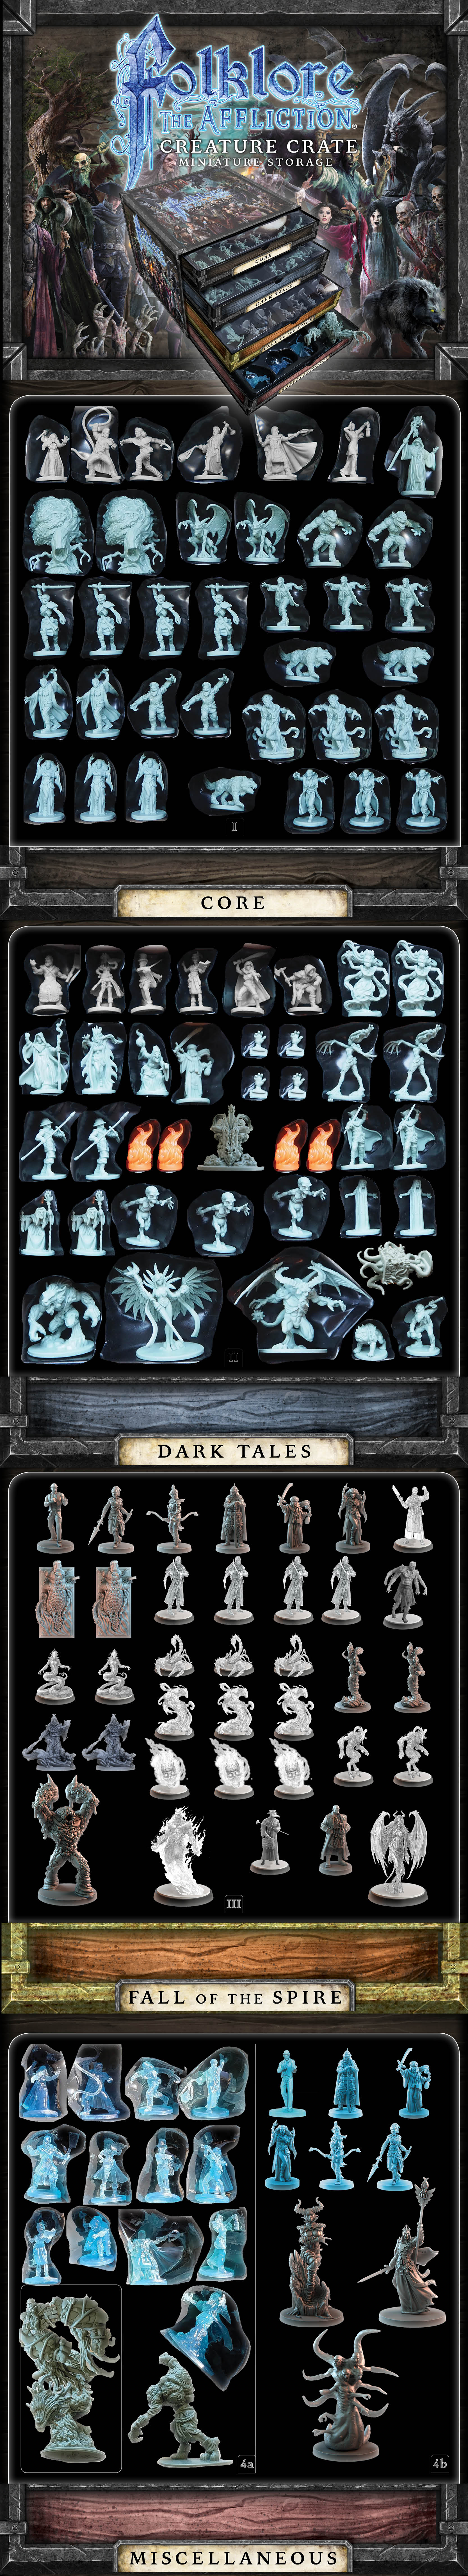 Folklore: The Affliction – Dark Tales Expansion: Return to Spice